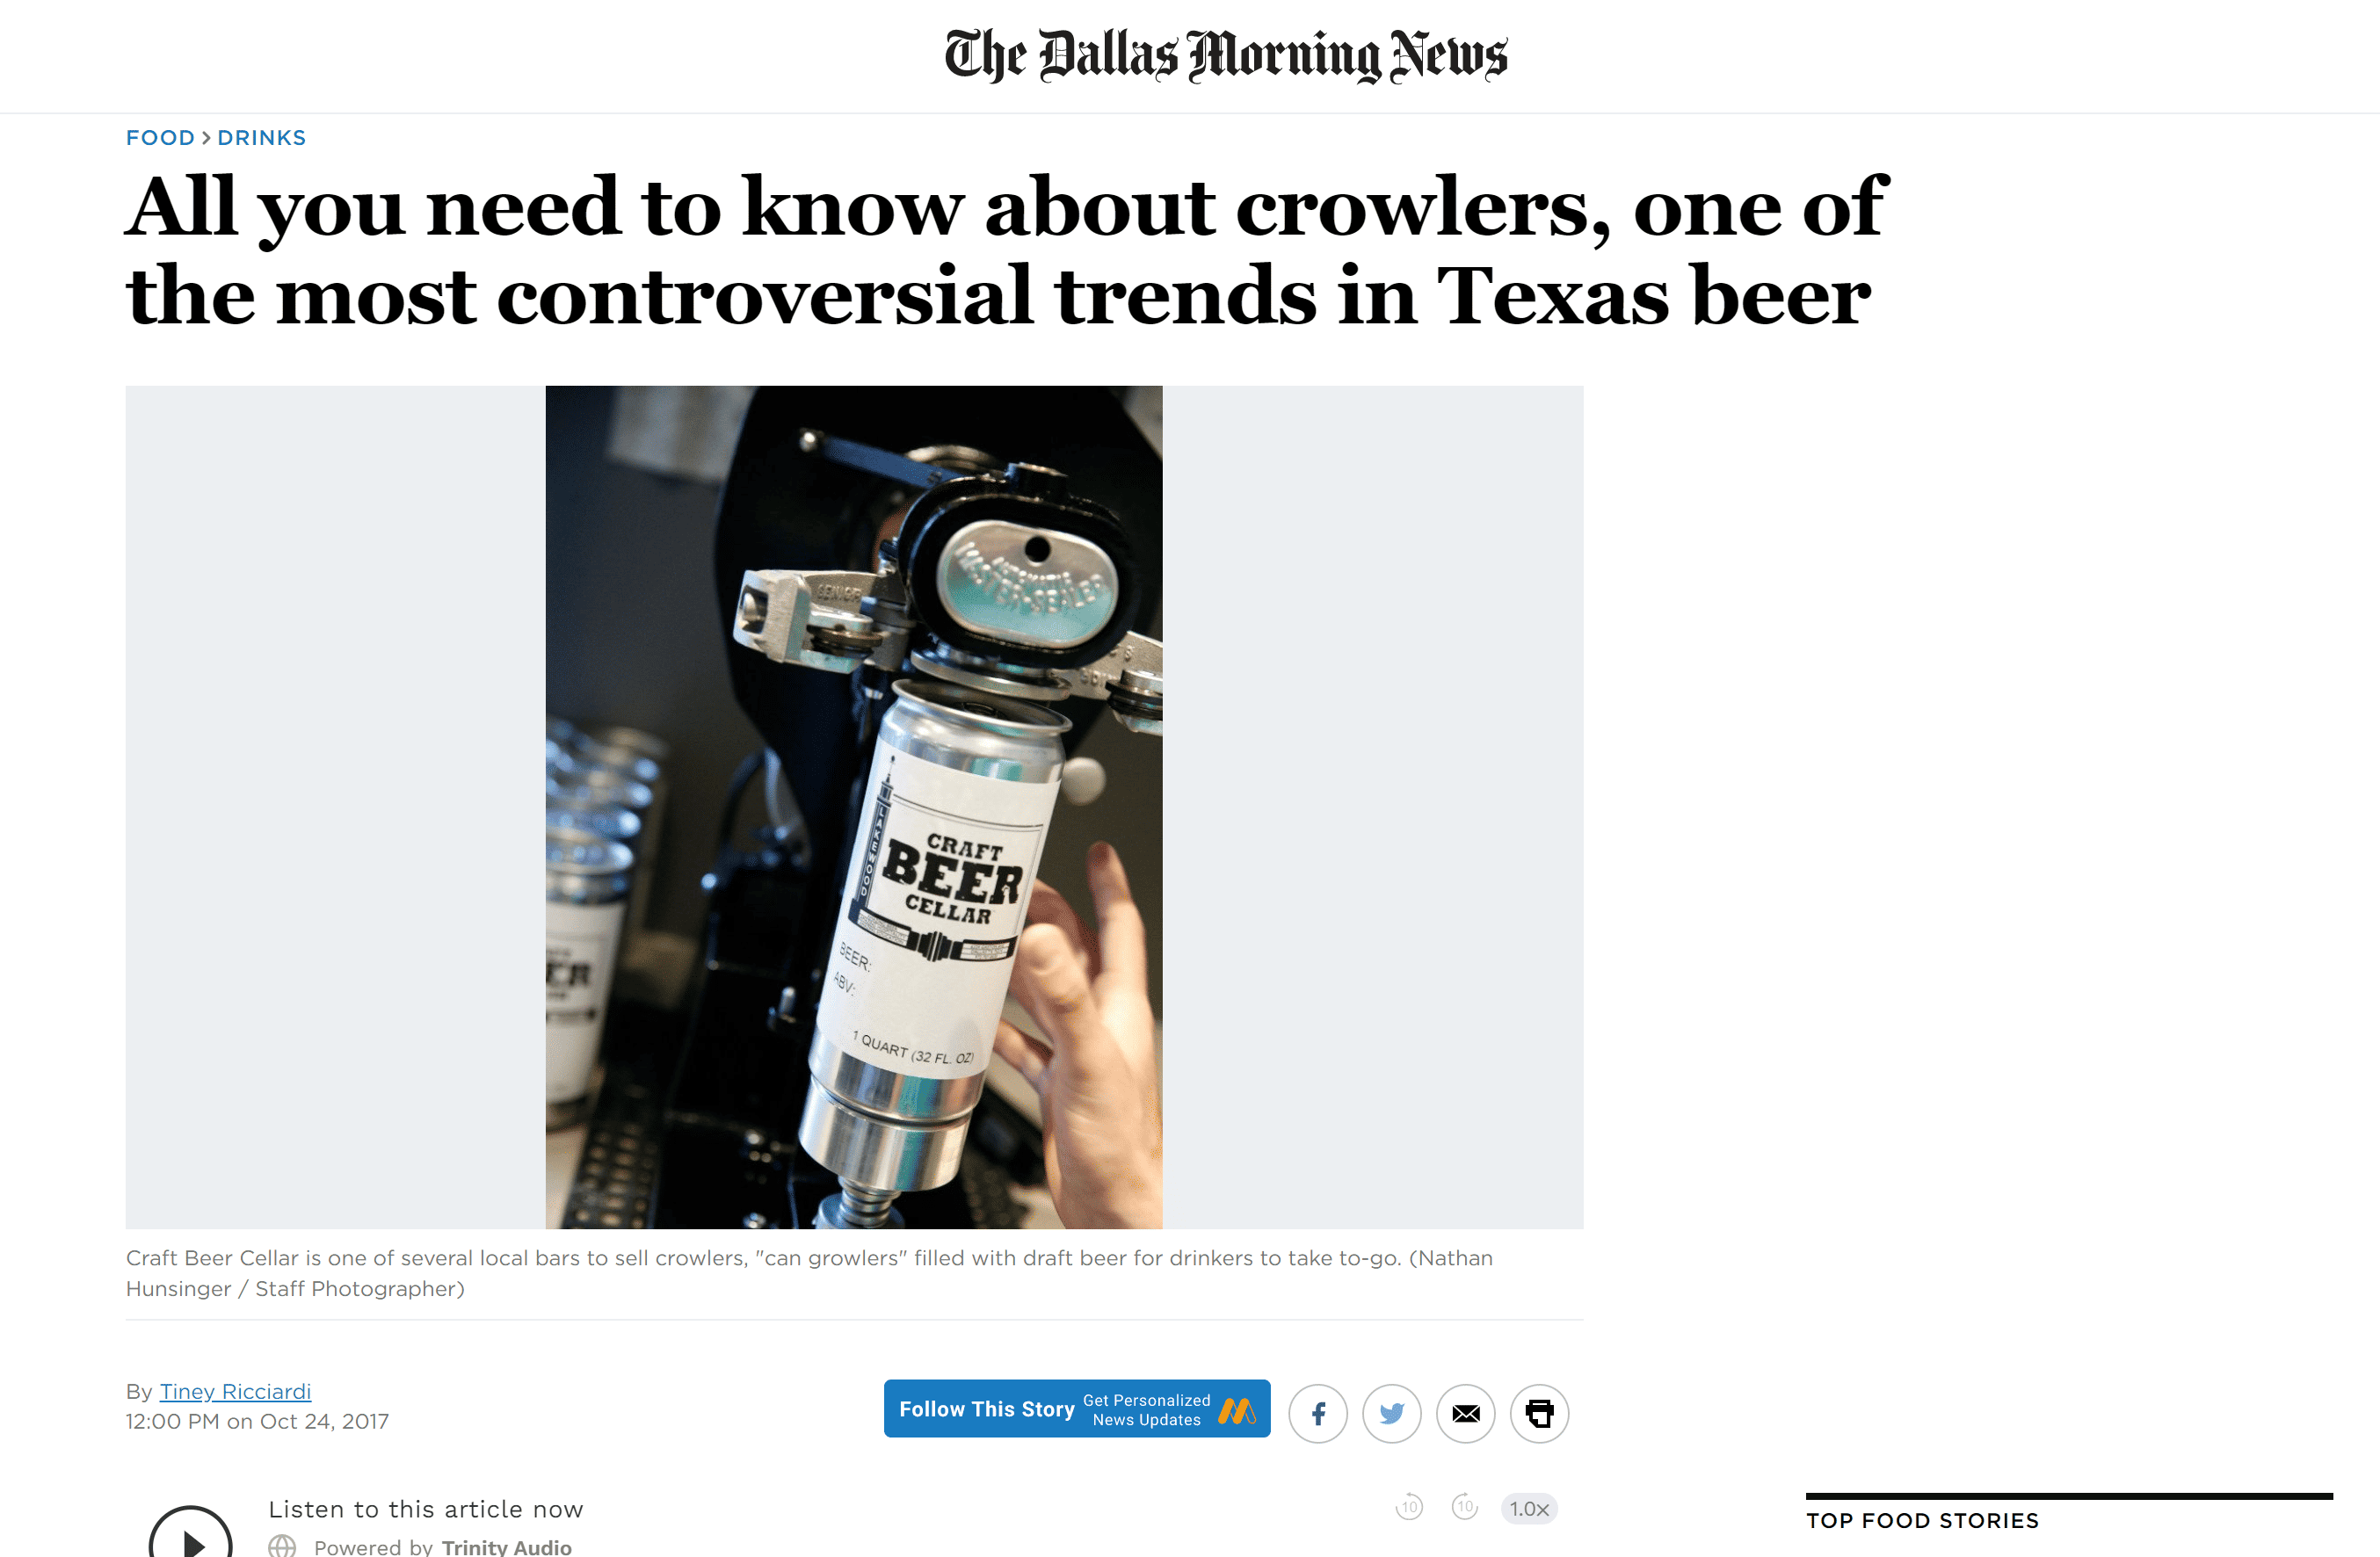 Controversial trend, crowler, covered in The Dallas Morning News